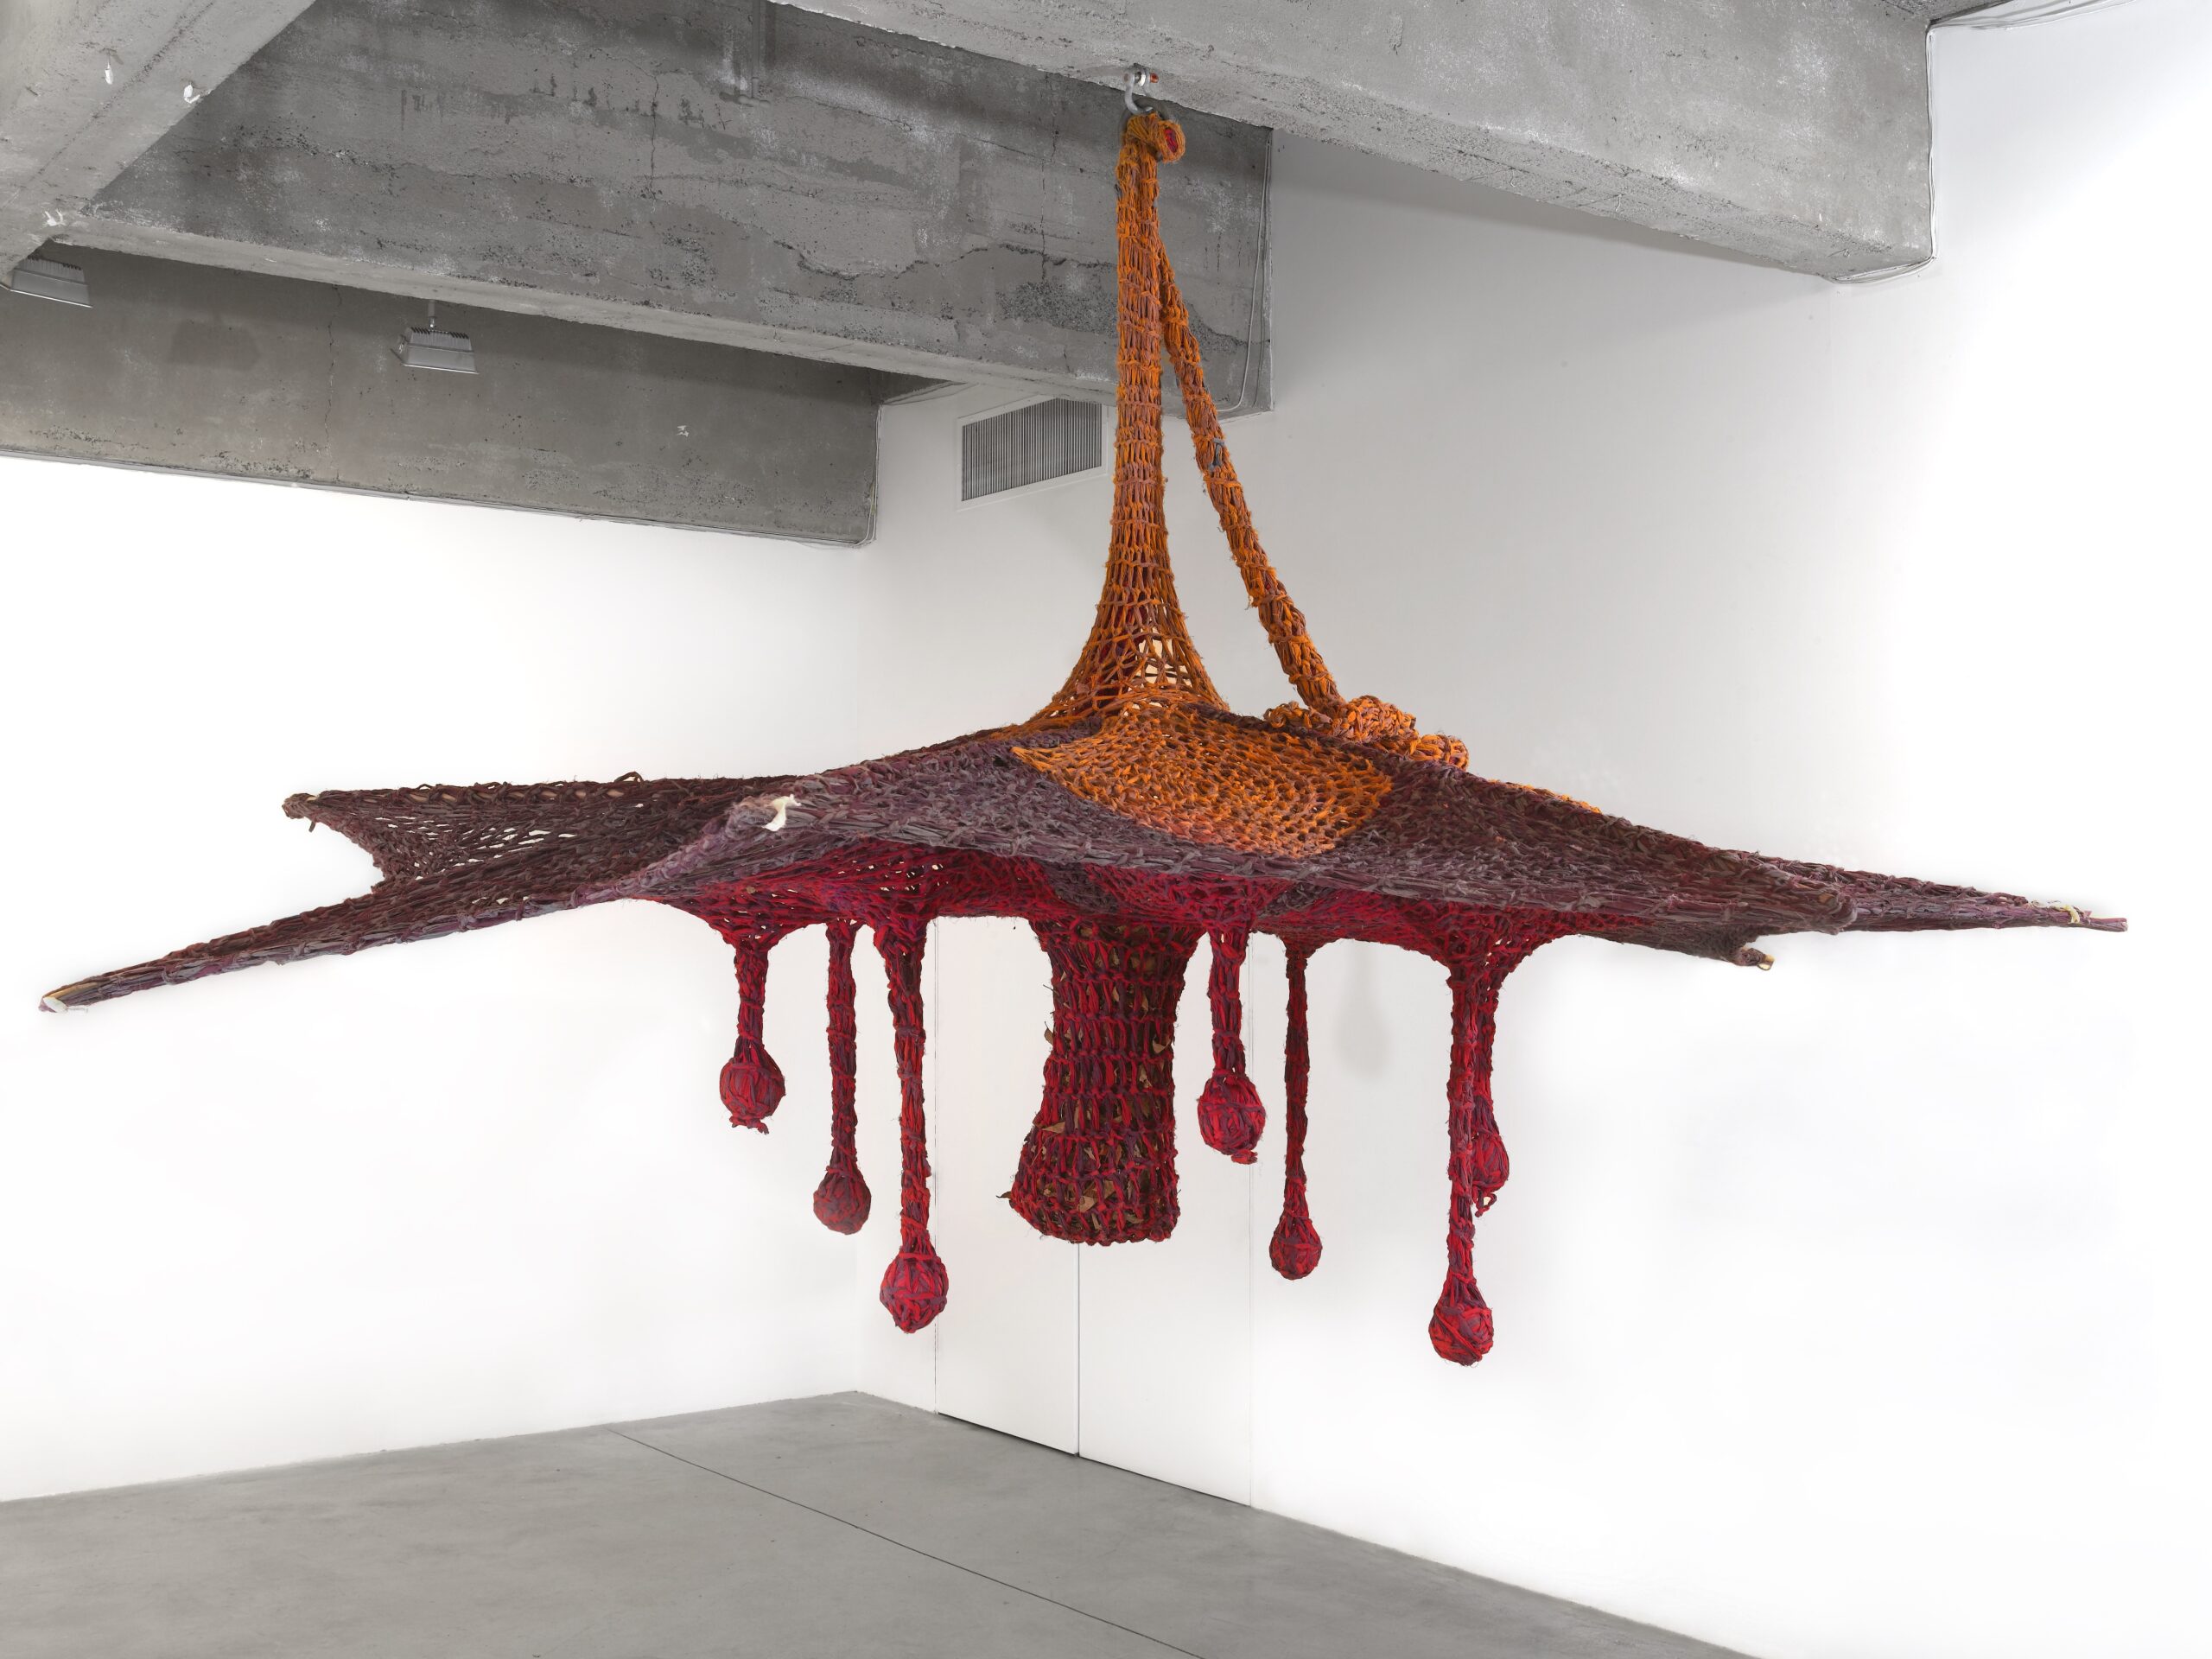 Ernesto Neto, “Winter Flower,” 2016. Cotton voile crochet, cotton voile thread balls, bamboo, semiprecious stones, wood and dry leaves, 138” x 147” x 148.” COURTESY OF THE ARTIST AND TANYA BONAKDAR GALLERY, NEW YORK/LOS ANGELES